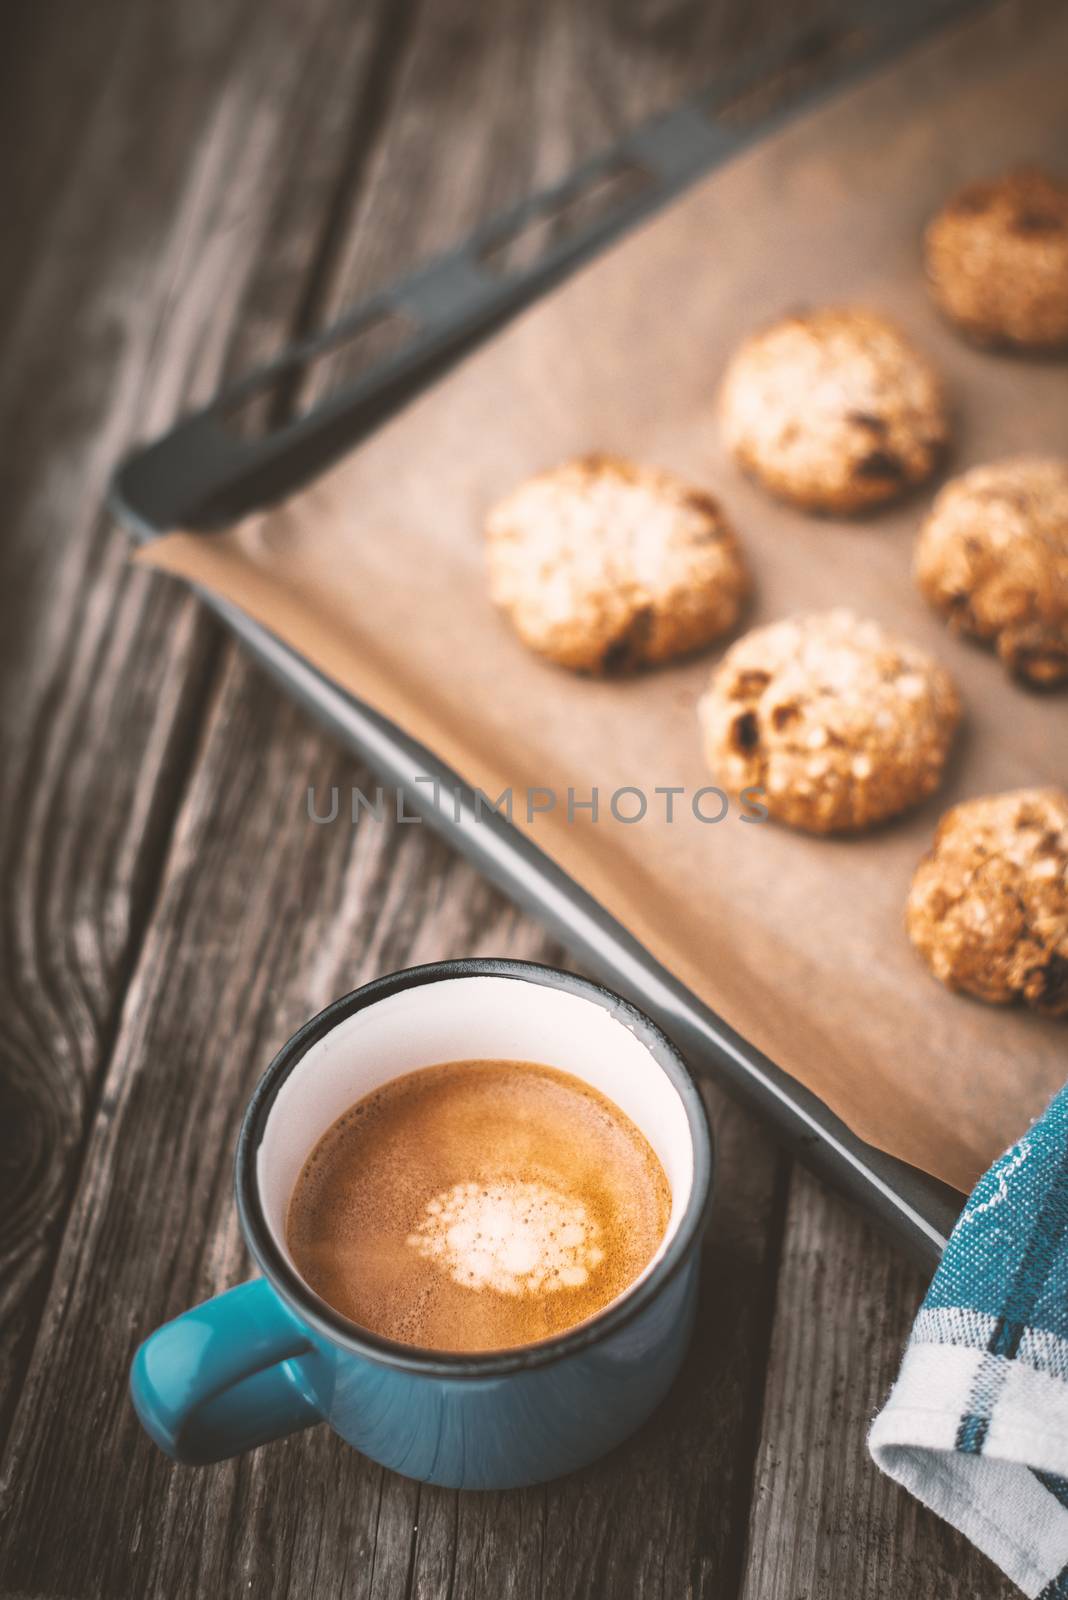 Oatmeal cookies and coffee cup on a wooden table vertical